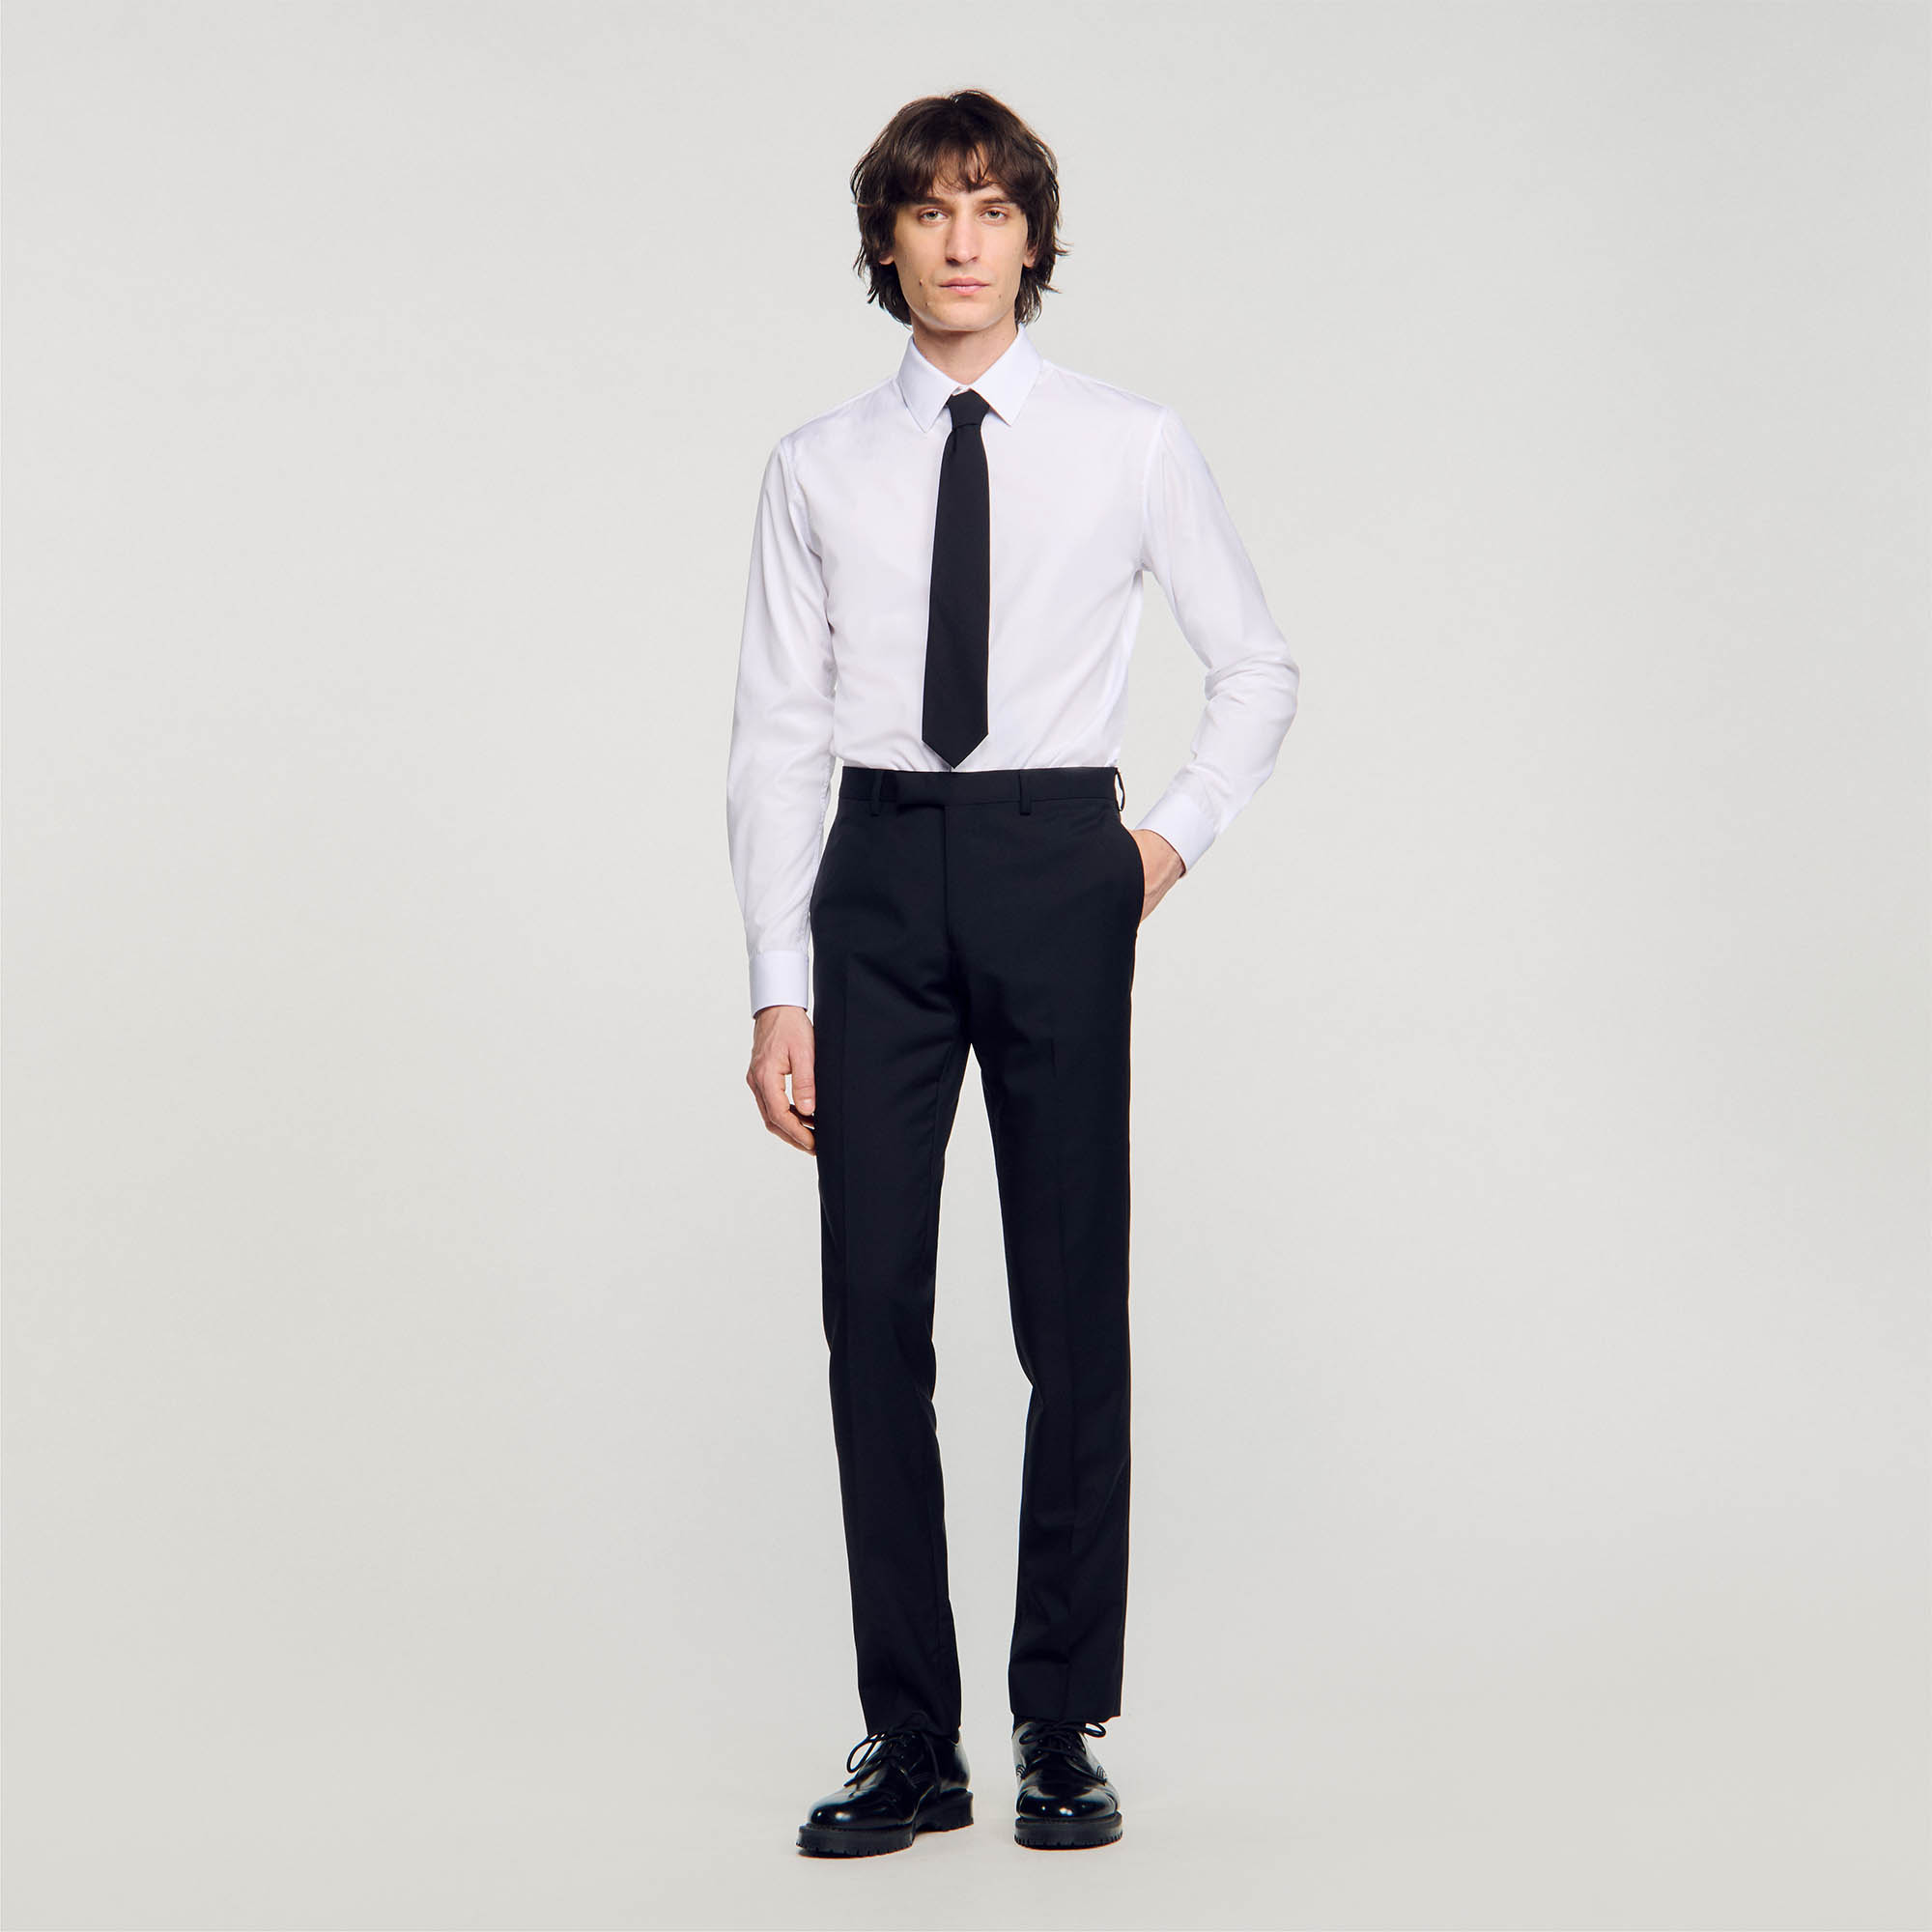 Sandro wool Tuxedo pants with satin panels, covered buttons and side pockets